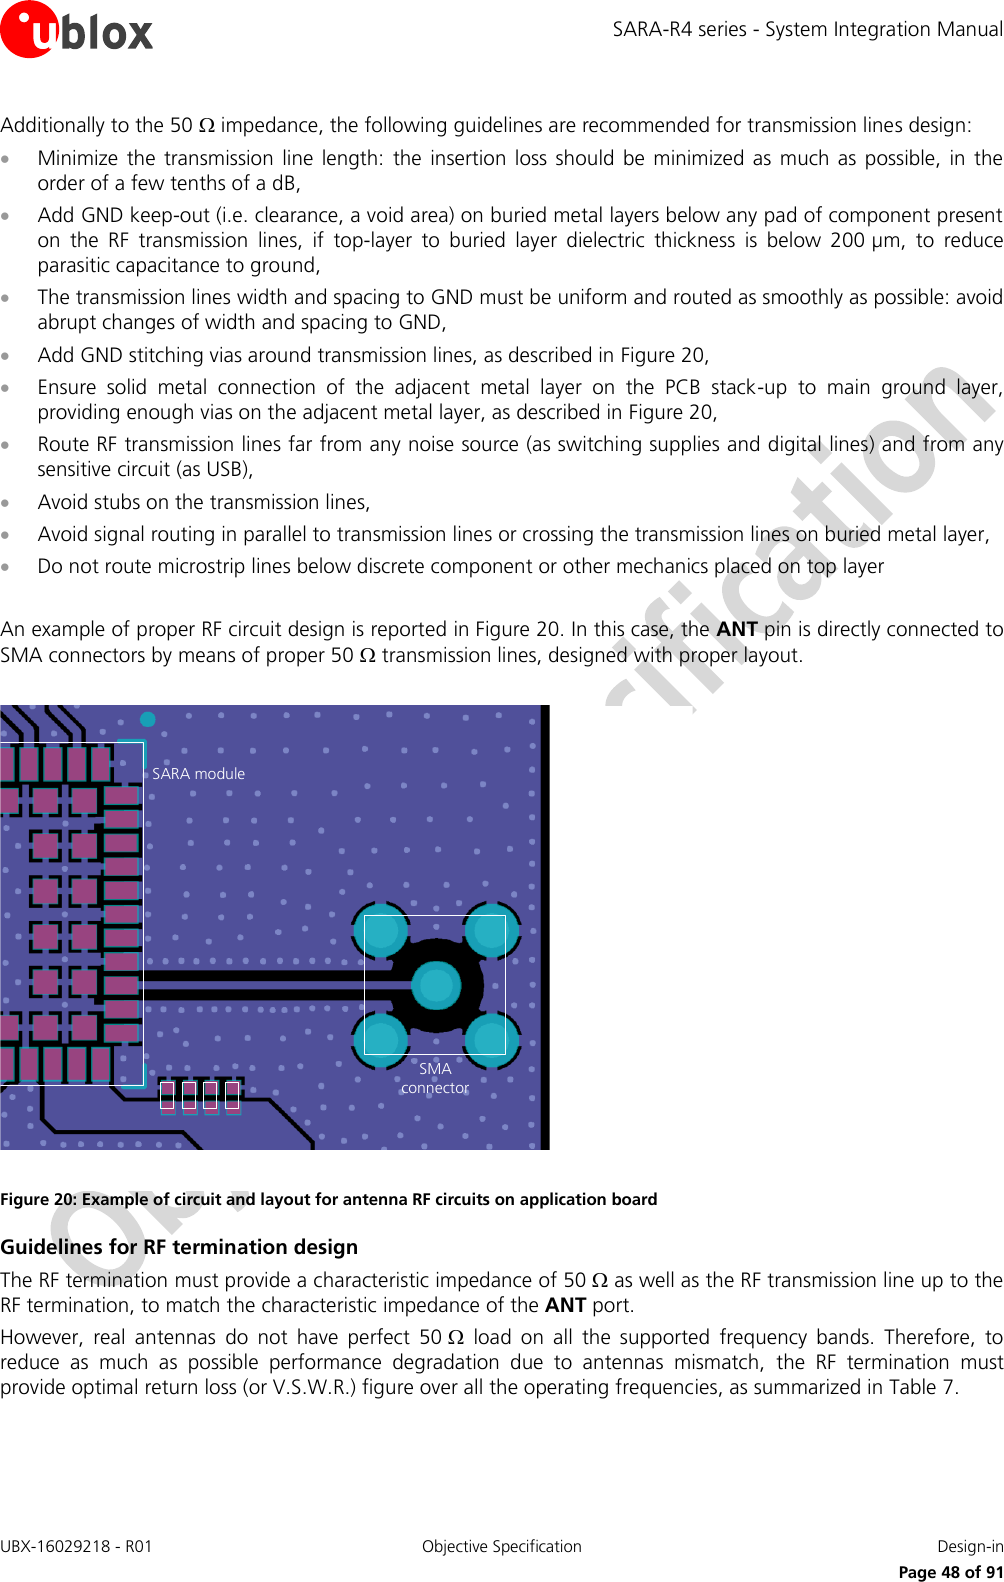 SARA-R4 series - System Integration Manual UBX-16029218 - R01  Objective Specification  Design-in     Page 48 of 91 Additionally to the 50  impedance, the following guidelines are recommended for transmission lines design:  Minimize  the  transmission  line length:  the  insertion loss  should  be  minimized  as  much  as  possible,  in the order of a few tenths of a dB,  Add GND keep-out (i.e. clearance, a void area) on buried metal layers below any pad of component present on  the  RF  transmission  lines,  if  top-layer  to  buried  layer  dielectric  thickness  is  below  200 µm,  to  reduce parasitic capacitance to ground,  The transmission lines width and spacing to GND must be uniform and routed as smoothly as possible: avoid abrupt changes of width and spacing to GND,  Add GND stitching vias around transmission lines, as described in Figure 20,  Ensure  solid  metal  connection  of  the  adjacent  metal  layer  on  the  PCB  stack-up  to  main  ground  layer, providing enough vias on the adjacent metal layer, as described in Figure 20,  Route RF transmission lines far from any noise source (as switching supplies and digital lines) and from any sensitive circuit (as USB),  Avoid stubs on the transmission lines,  Avoid signal routing in parallel to transmission lines or crossing the transmission lines on buried metal layer,  Do not route microstrip lines below discrete component or other mechanics placed on top layer  An example of proper RF circuit design is reported in Figure 20. In this case, the ANT pin is directly connected to SMA connectors by means of proper 50  transmission lines, designed with proper layout.   Figure 20: Example of circuit and layout for antenna RF circuits on application board Guidelines for RF termination design The RF termination must provide a characteristic impedance of 50  as well as the RF transmission line up to the RF termination, to match the characteristic impedance of the ANT port. However,  real  antennas  do  not  have  perfect  50   load  on  all  the  supported  frequency  bands.  Therefore,  to reduce  as  much  as  possible  performance  degradation  due  to  antennas  mismatch,  the  RF  termination  must provide optimal return loss (or V.S.W.R.) figure over all the operating frequencies, as summarized in Table 7.   SARA moduleSMAconnector